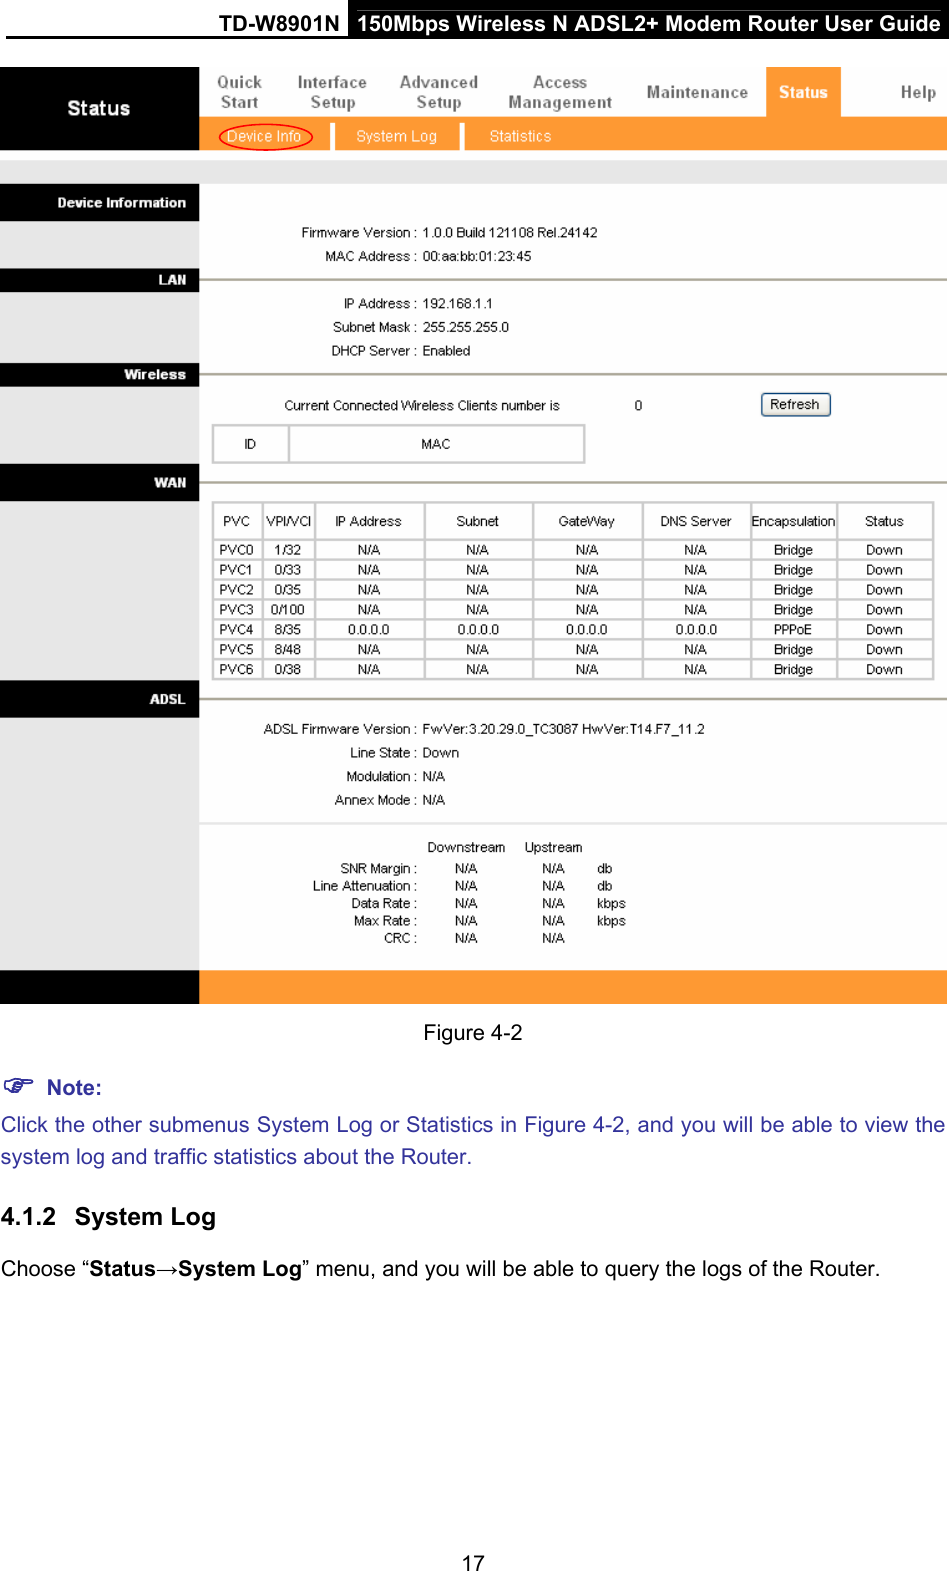 TD-W8901N  150Mbps Wireless N ADSL2+ Modem Router User Guide 17  Figure 4-2  Note: Click the other submenus System Log or Statistics in Figure 4-2, and you will be able to view the system log and traffic statistics about the Router. 4.1.2  System Log Choose “Status→System Log” menu, and you will be able to query the logs of the Router. 